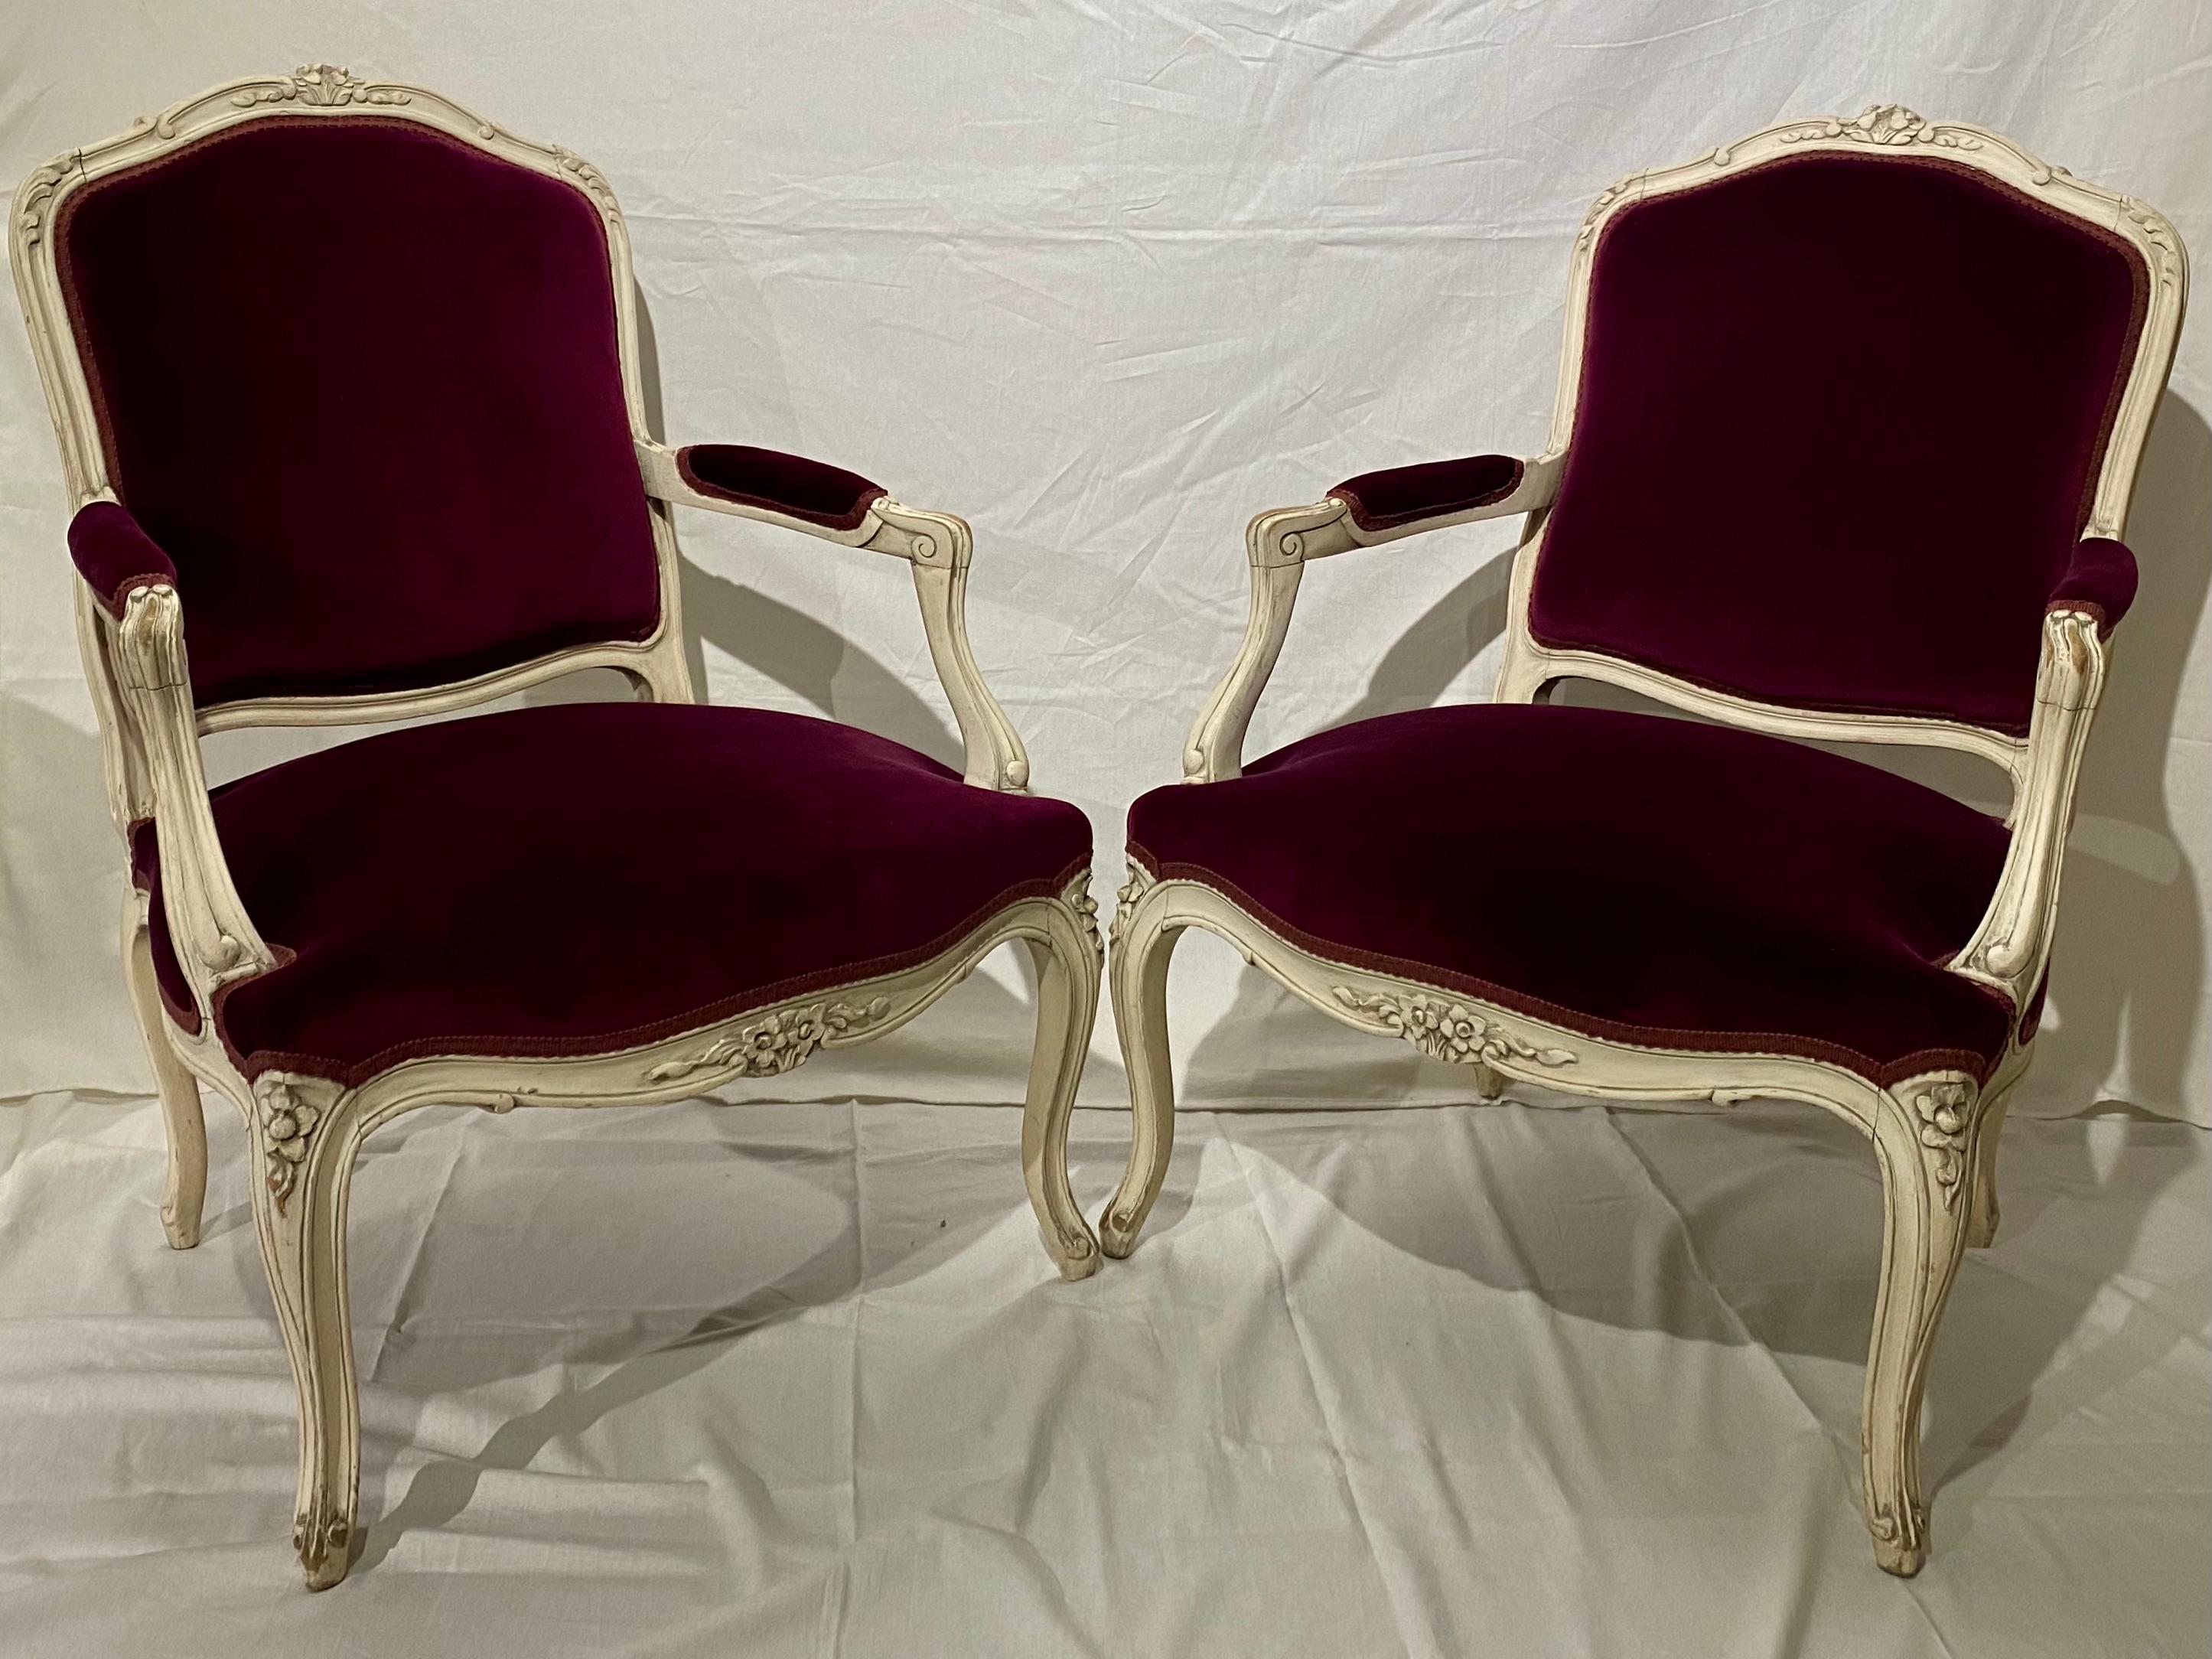 French pair of armchairs, Louis XV Montespan style, 19th century
Very beautiful model and lovely wood finish, upholstered in eggplant coloured velvet.